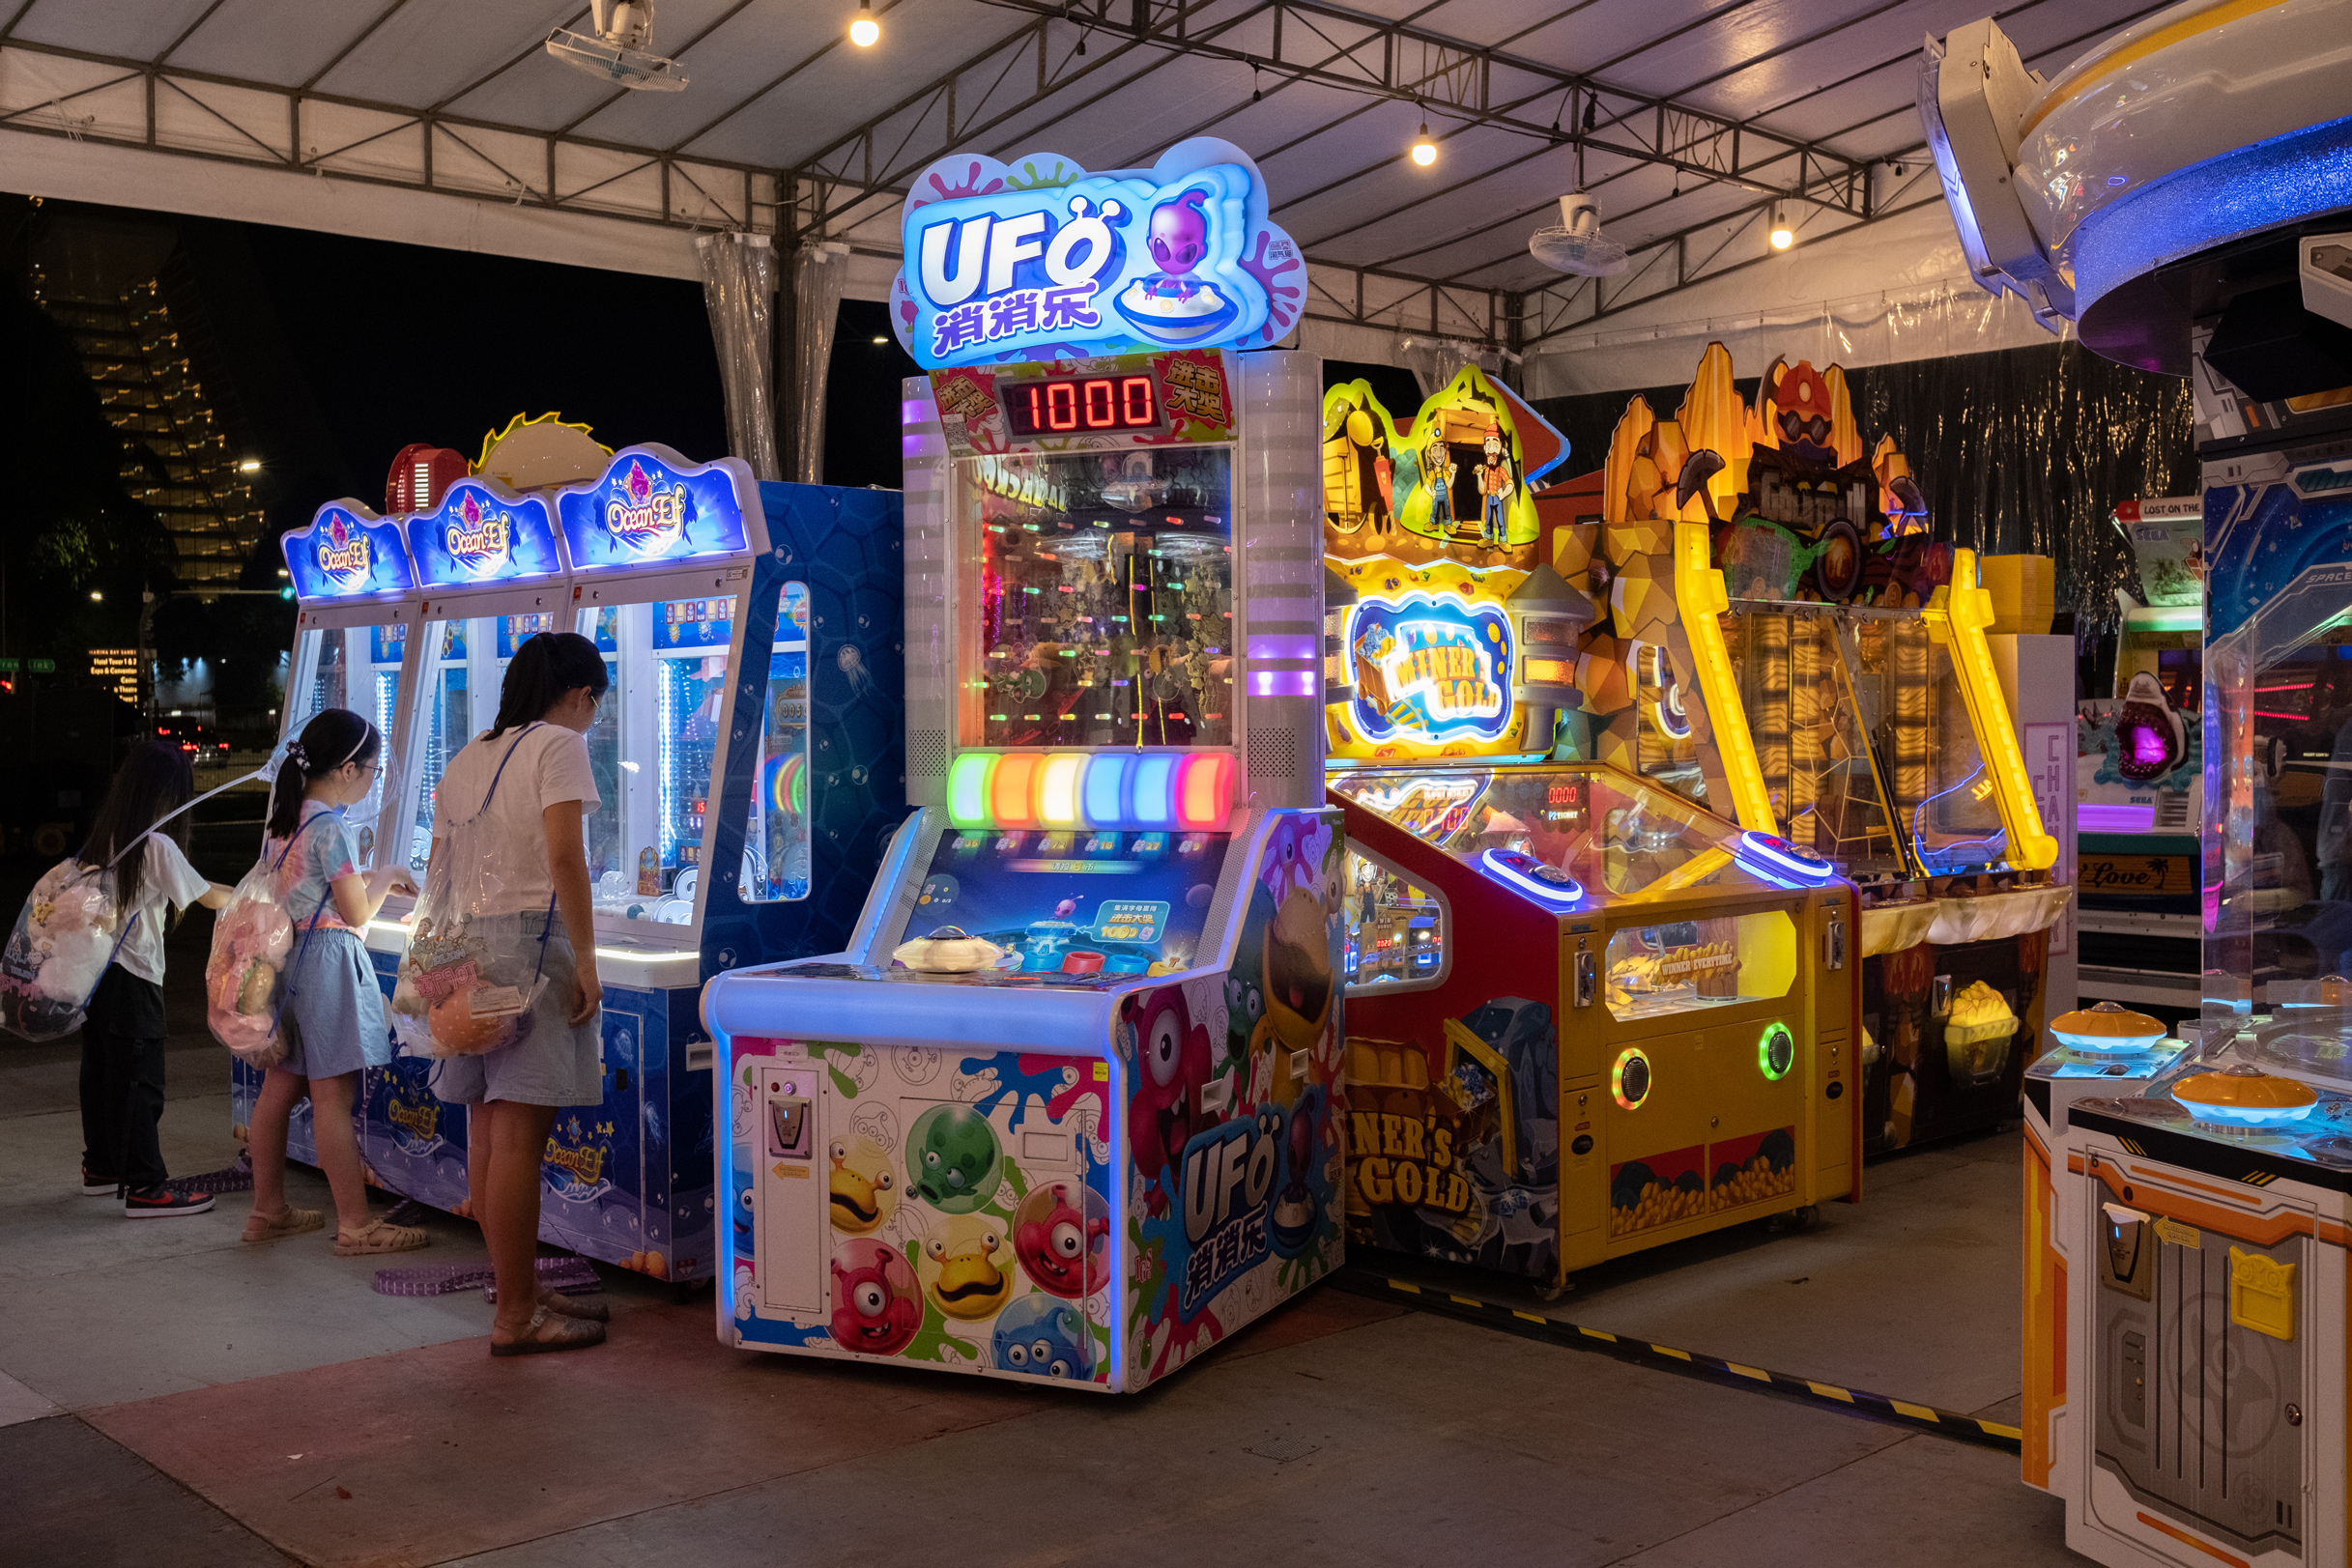 Exciting arcade game machines at GastroBeats 2023.